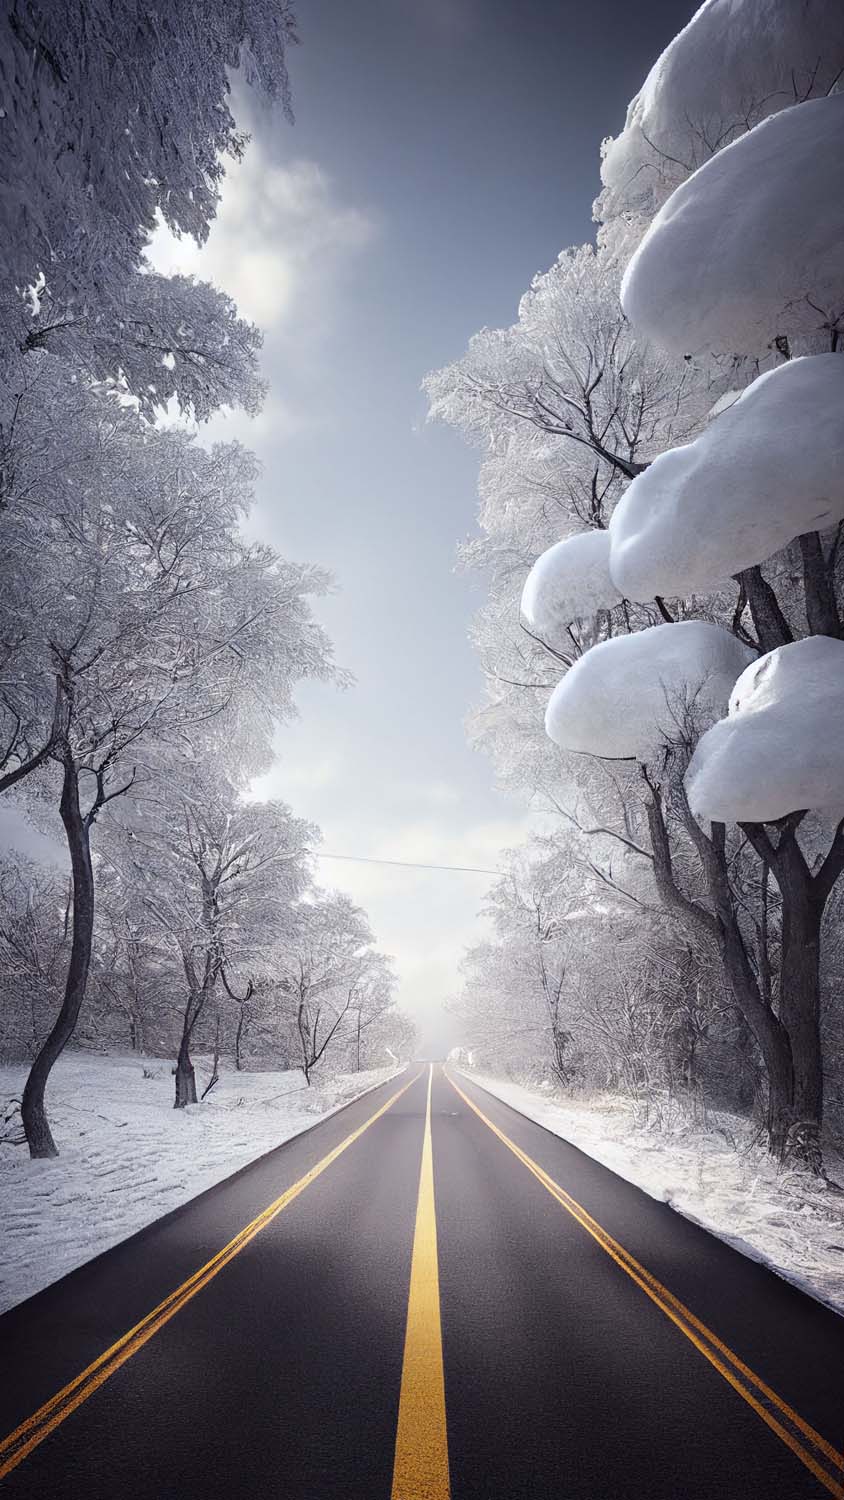 Snow Road IPhone Wallpaper HD - IPhone Wallpapers : iPhone Wallpapers